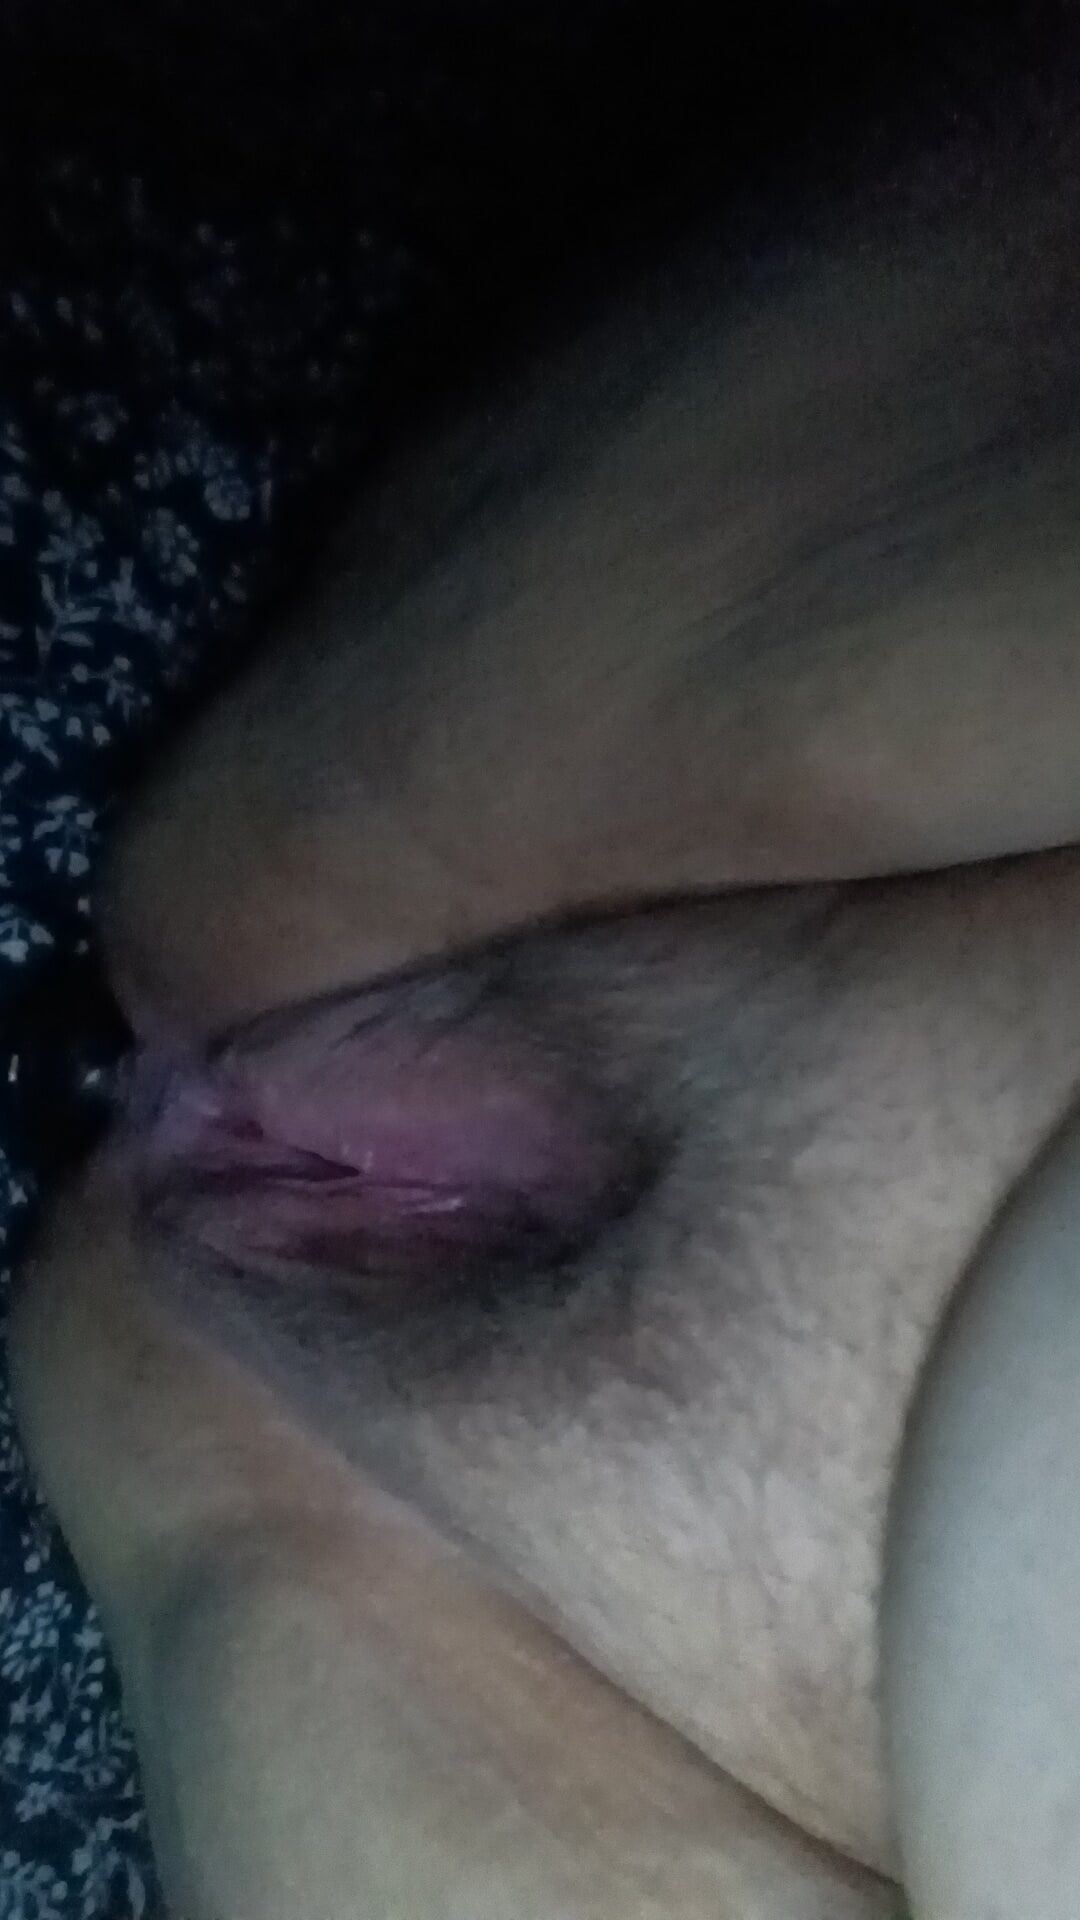 Playing with my butt plug